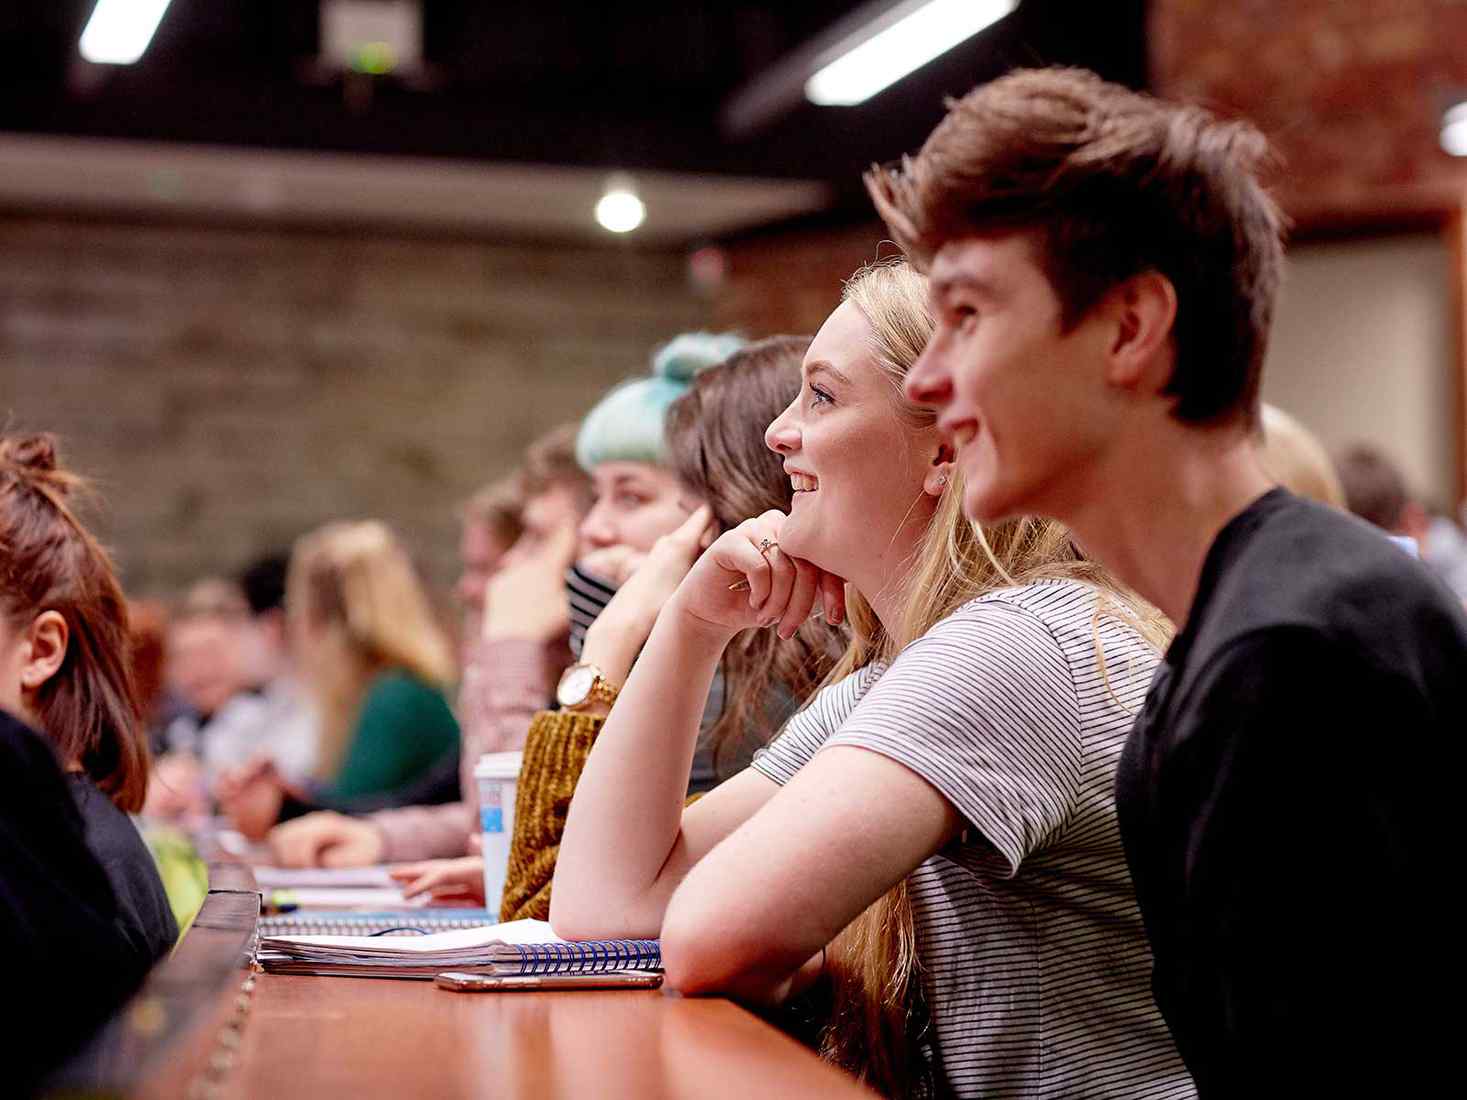 students in a lecture. They are smiling  